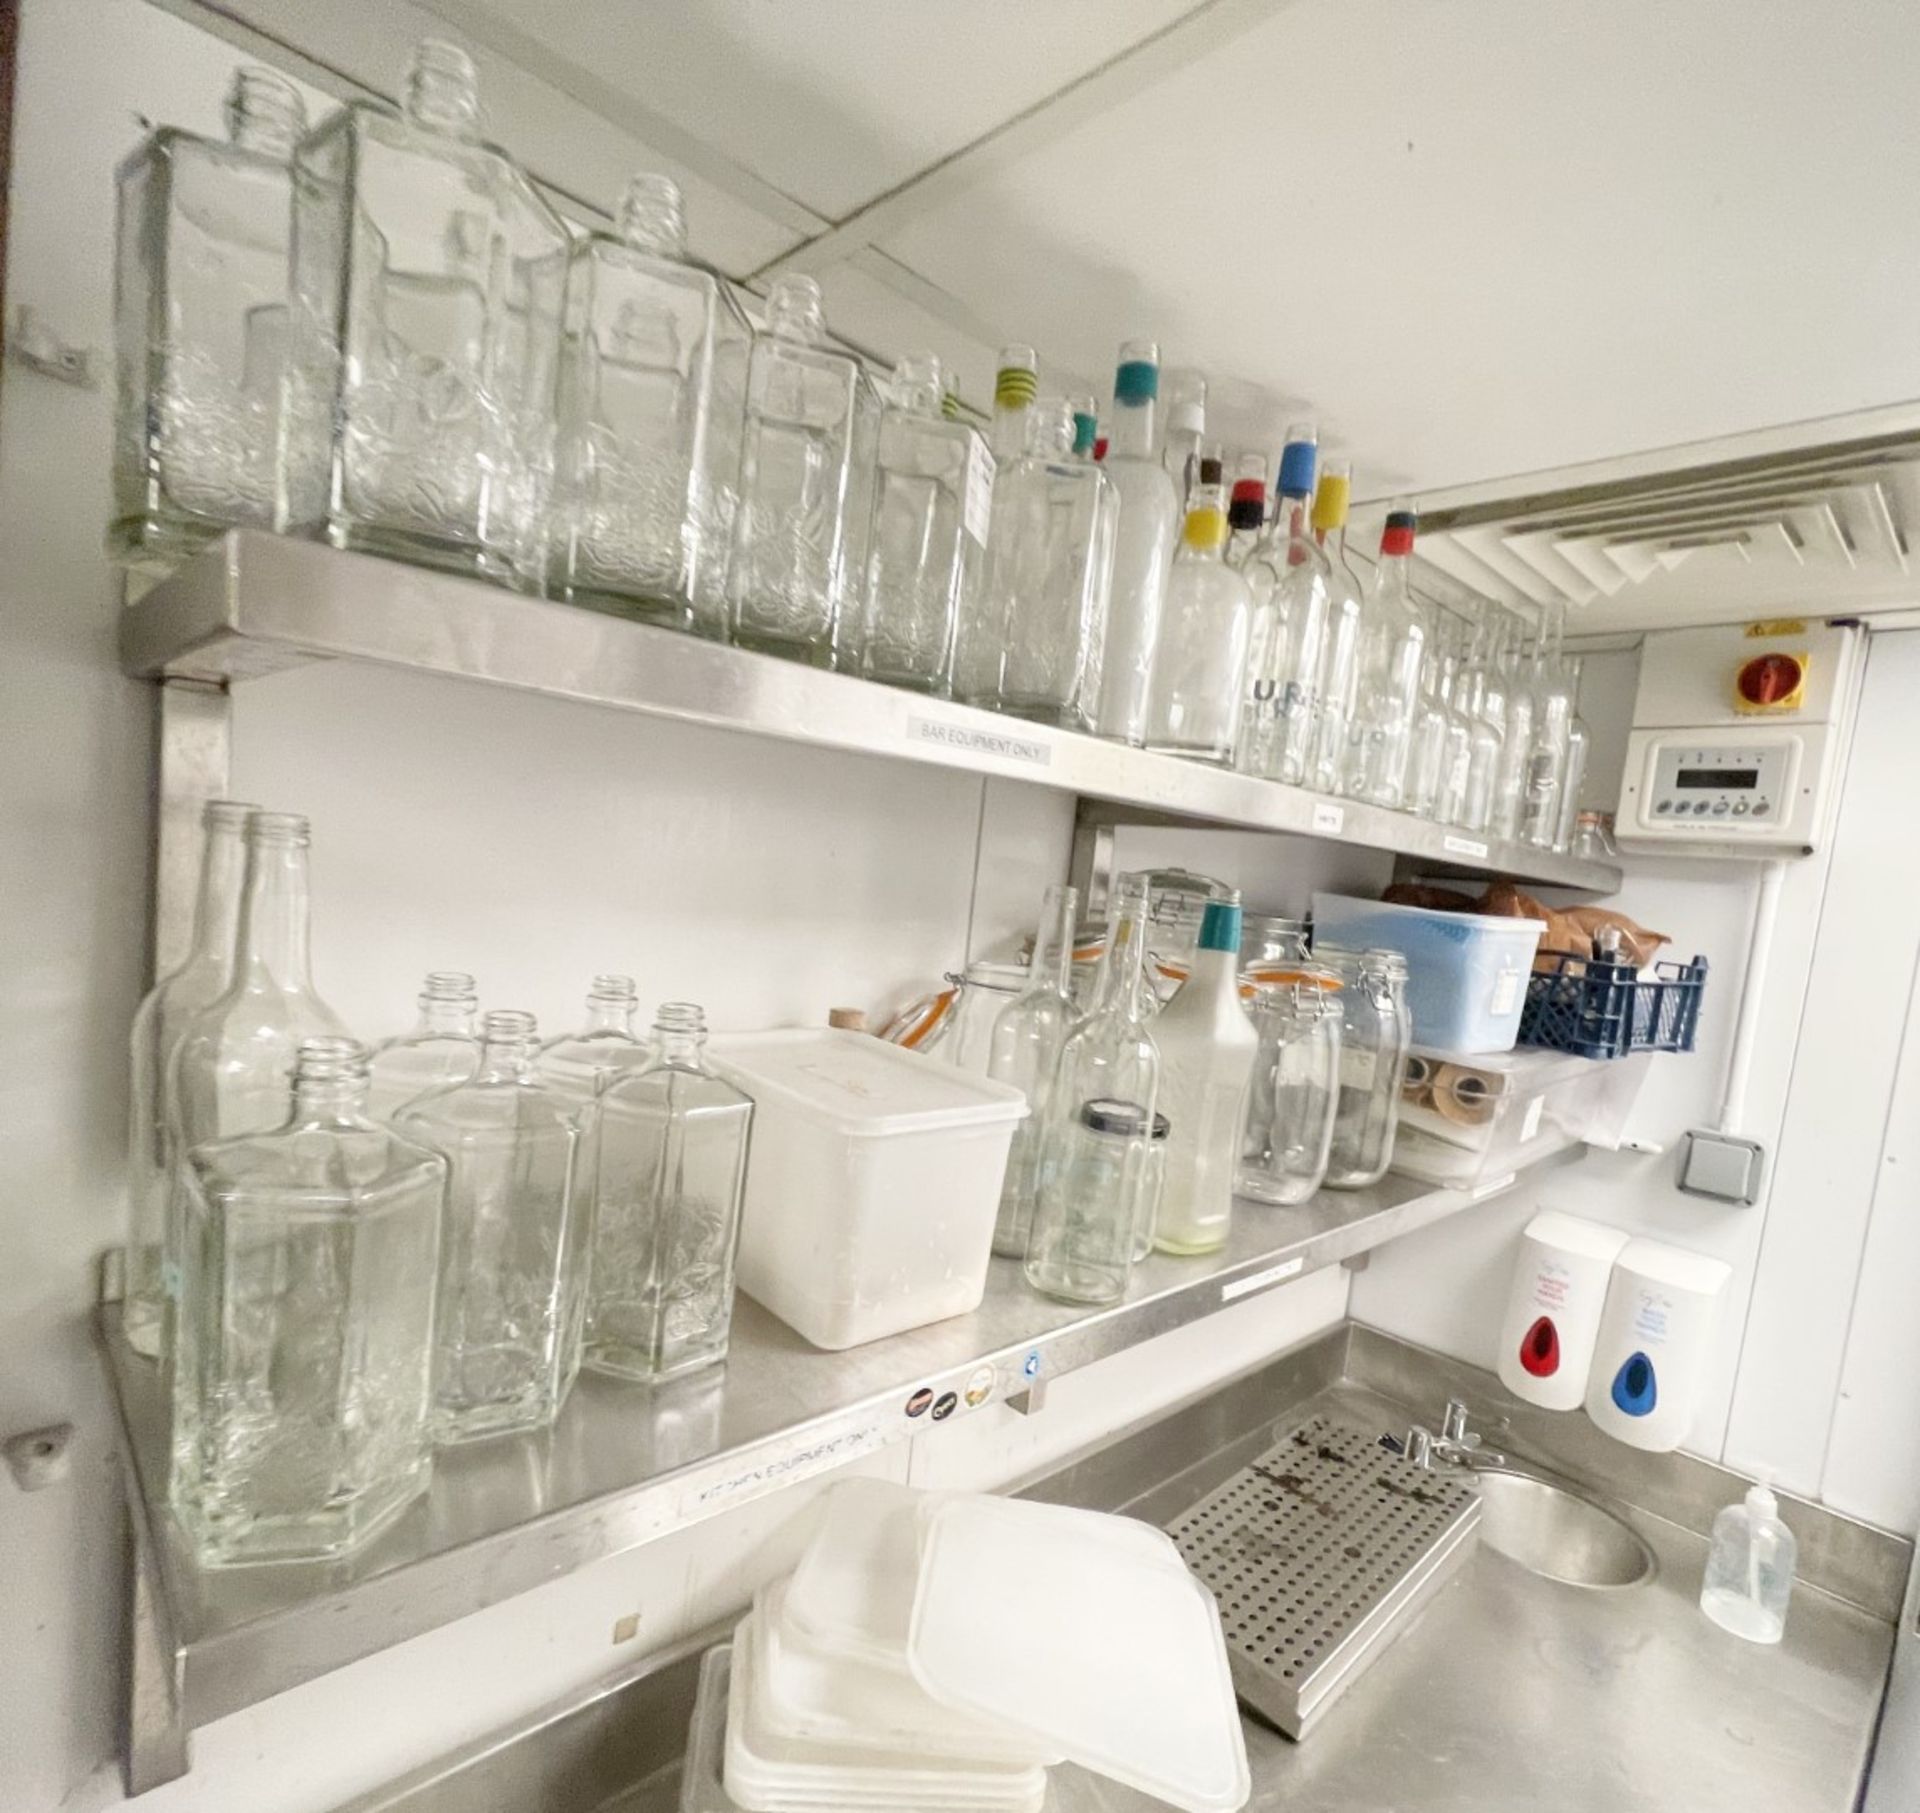 2 x Wall Mounted Stainless Steel Shelves with Contents - 165cm Wide - Includes a Variety of Glasses - Image 5 of 5